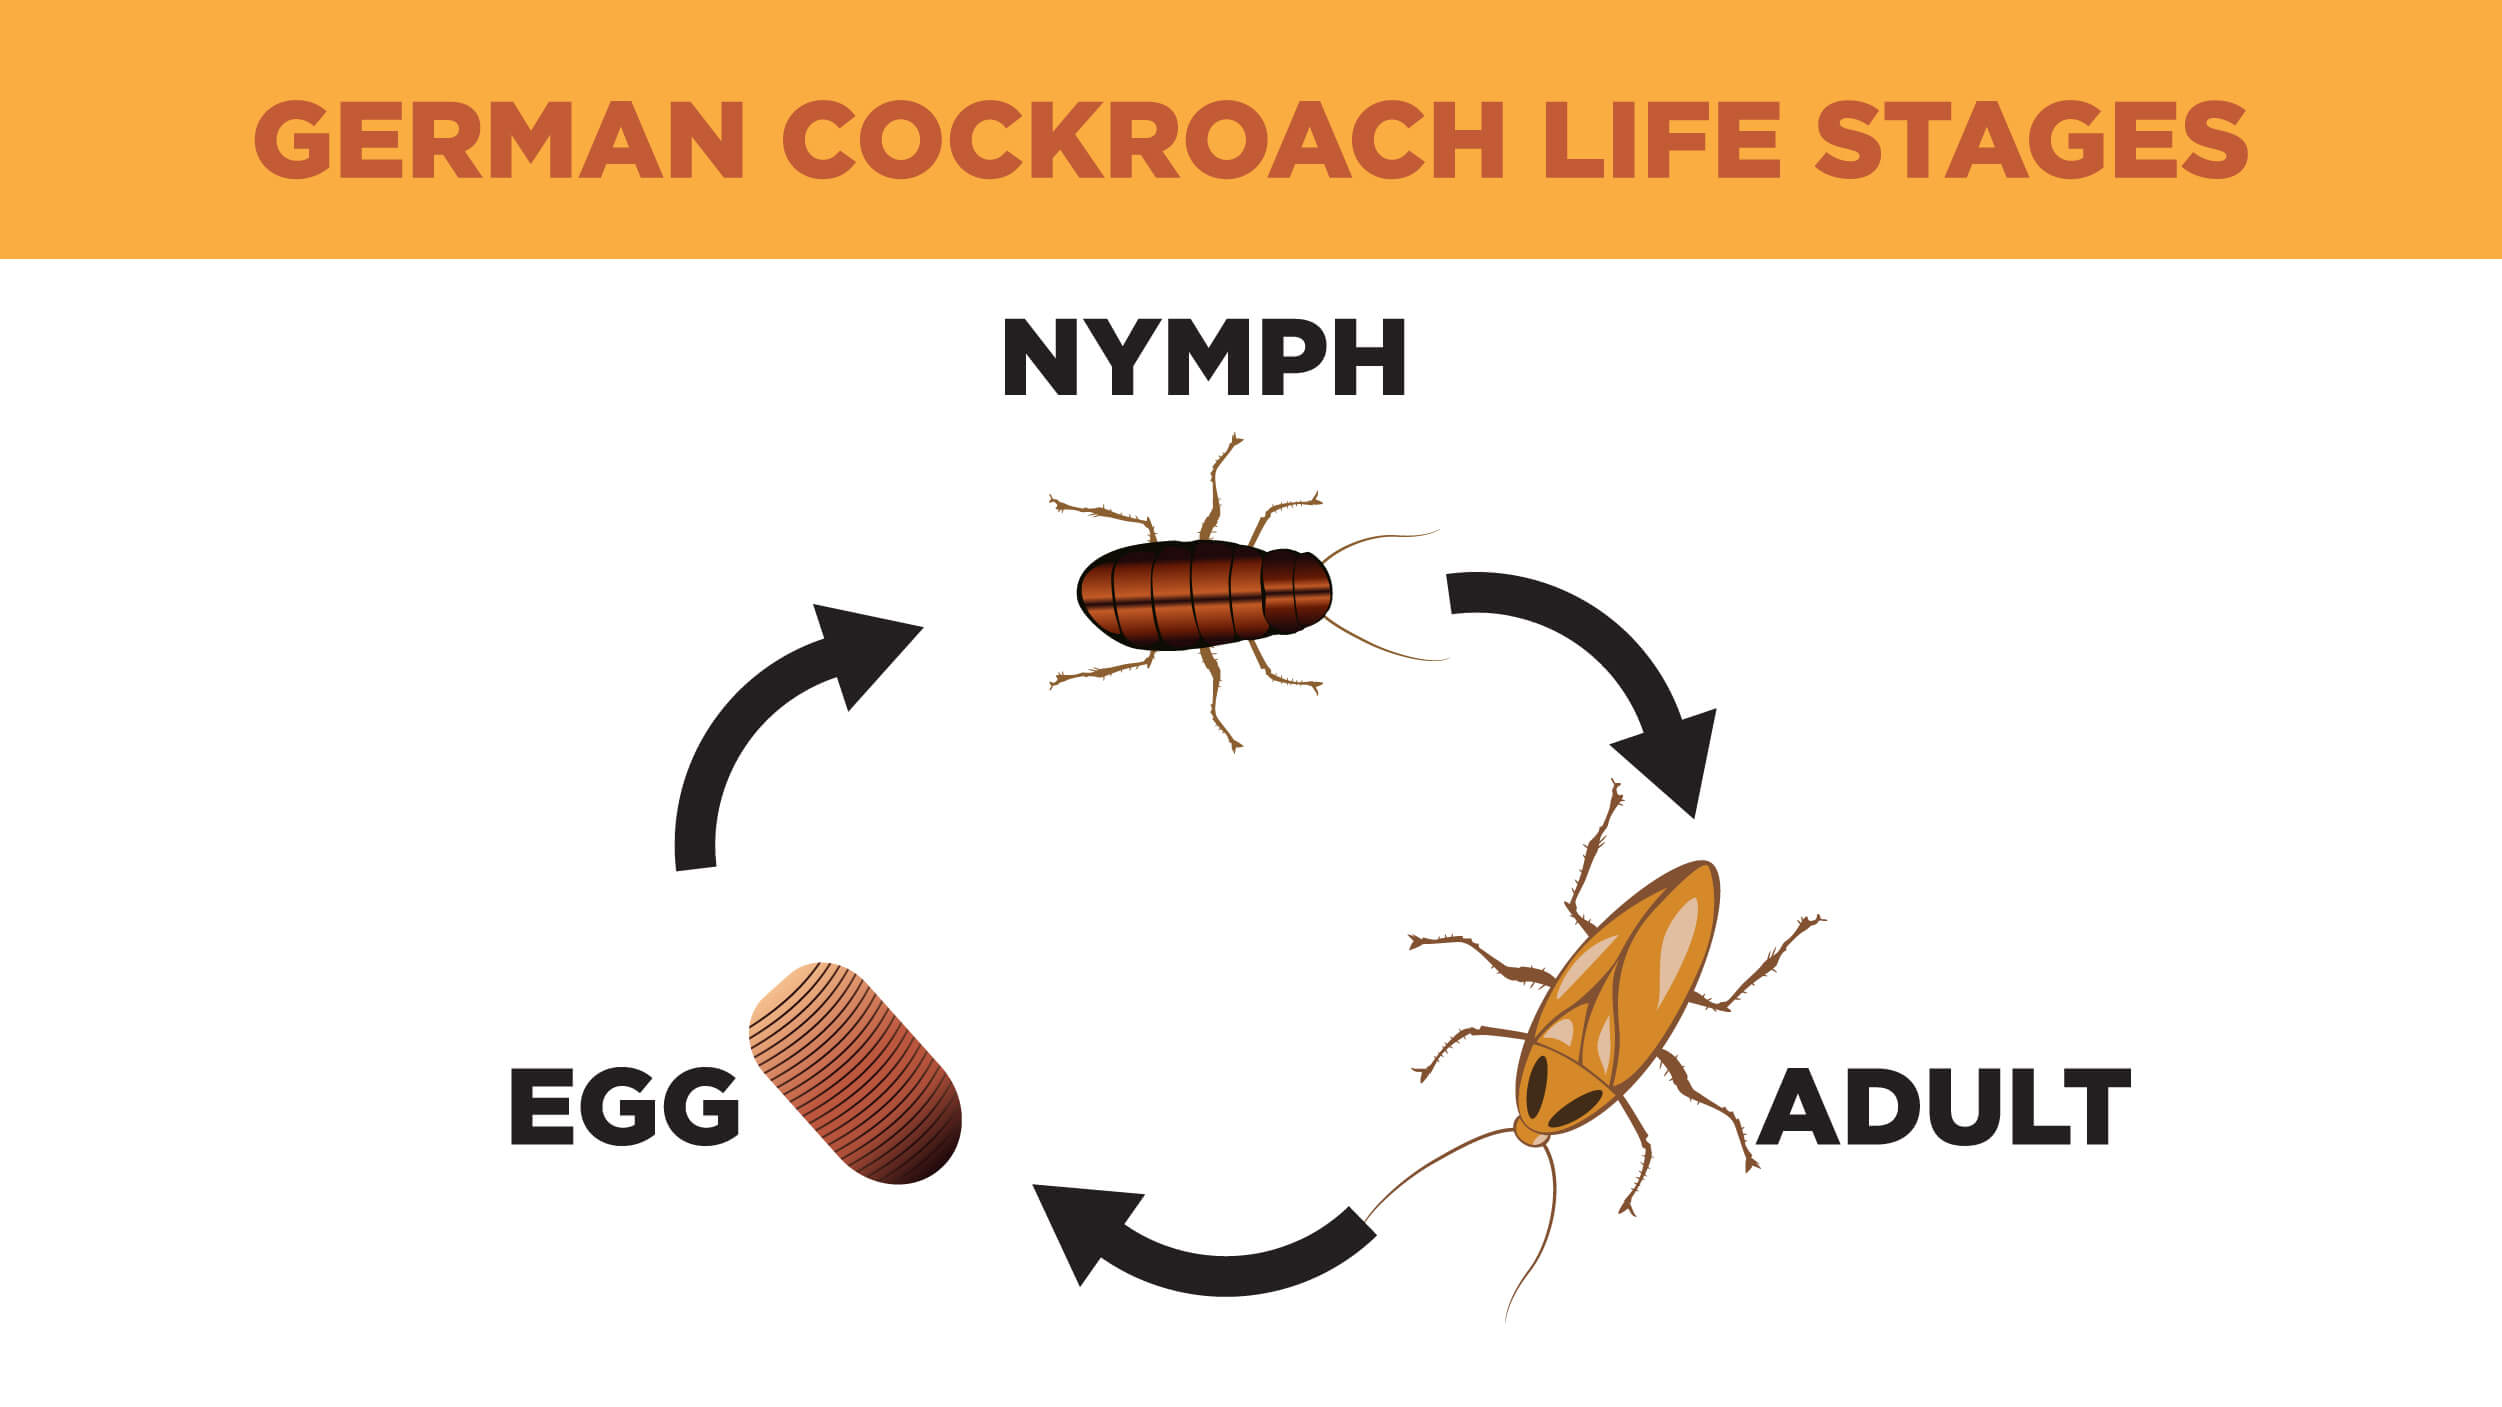 Illustration featuring the life cycle of the German cockroach, from egg, to nymph, to adult.